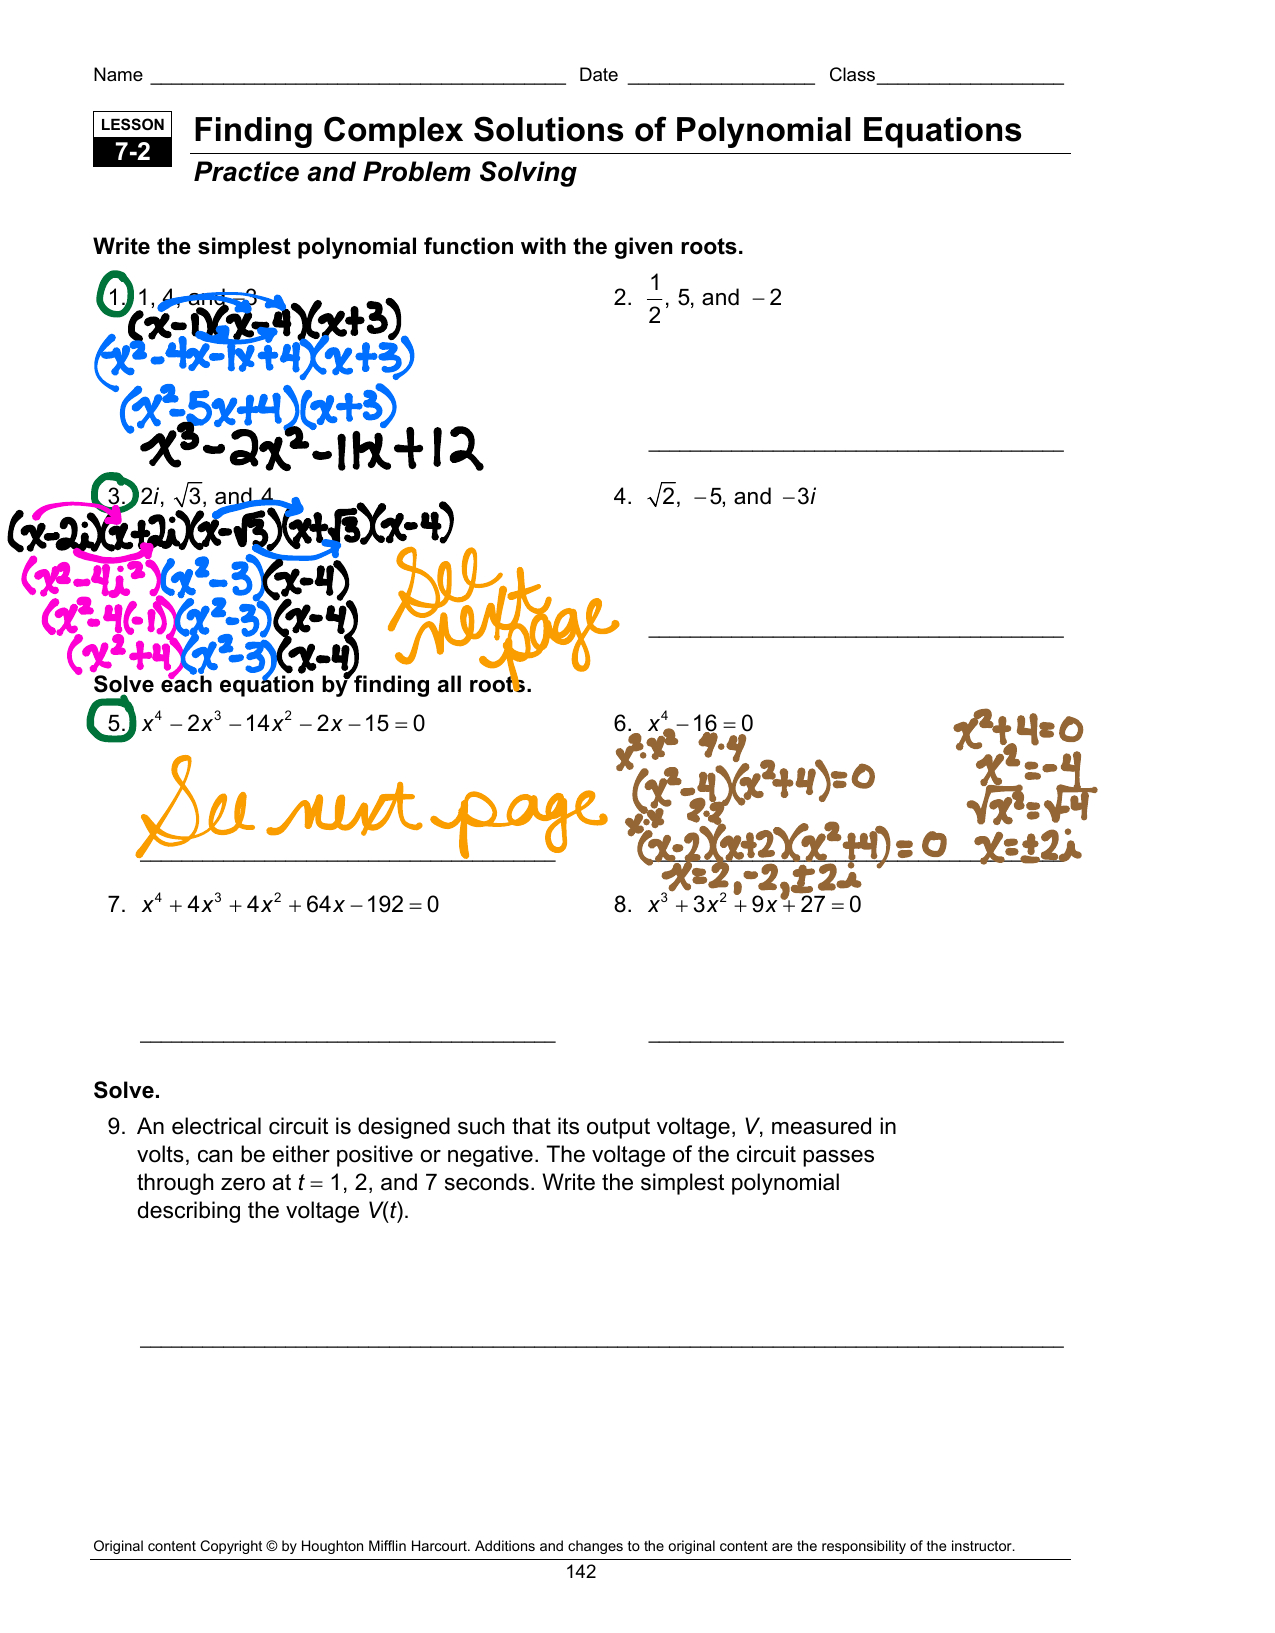 Finding Complex Solutions Of Polynomial Equations For Finding Complex Solutions Of Quadratic Equations Worksheet